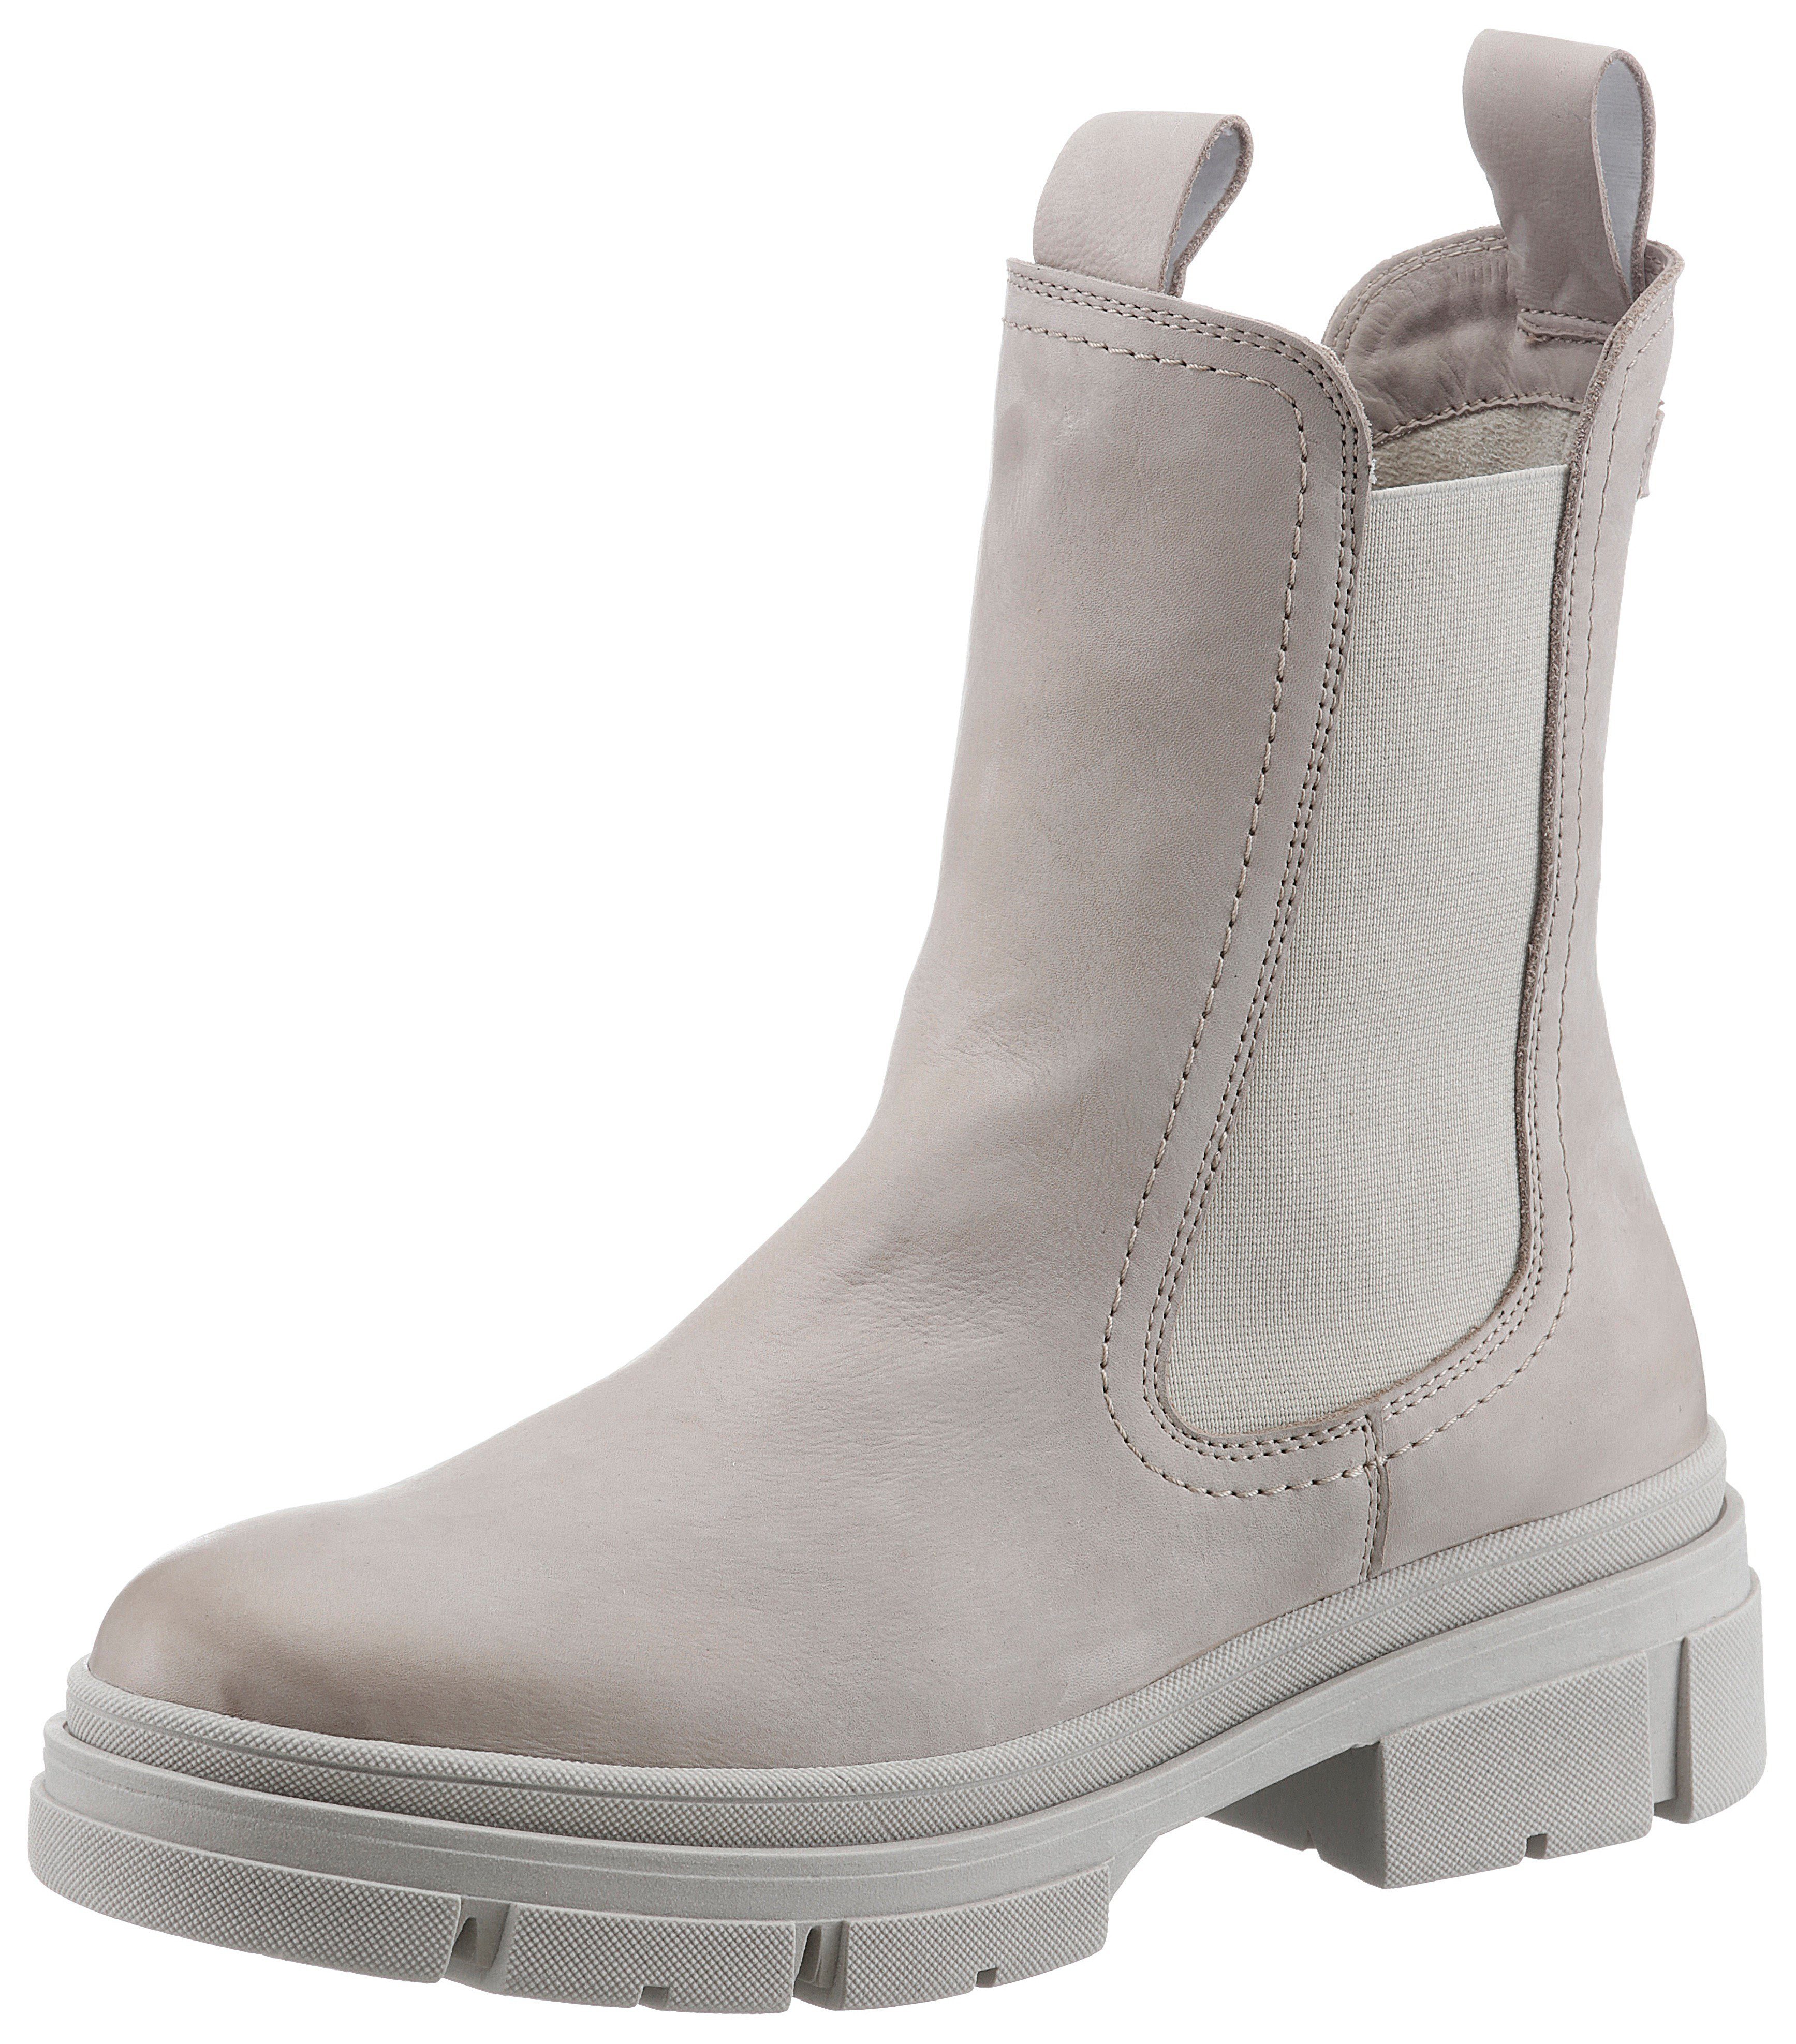 Tamaris taupe in Chelseaboots Form bequemer